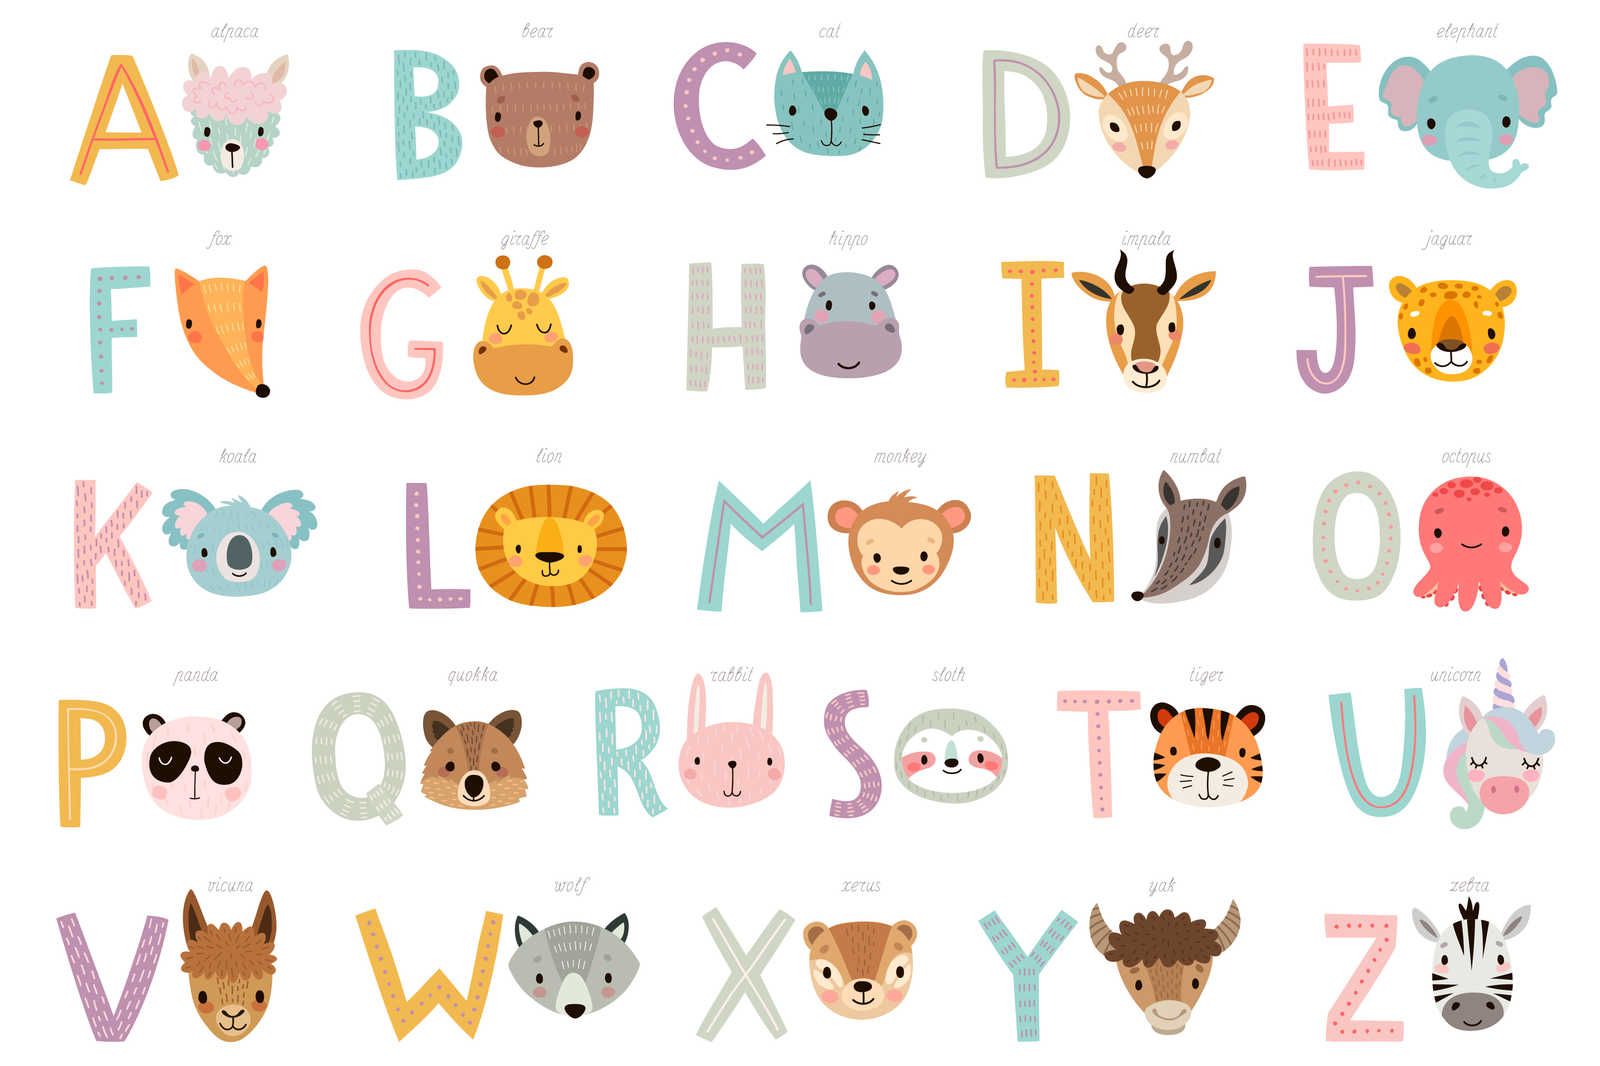             Canvas ABC with animals and animal names - 90 cm x 60 cm
        